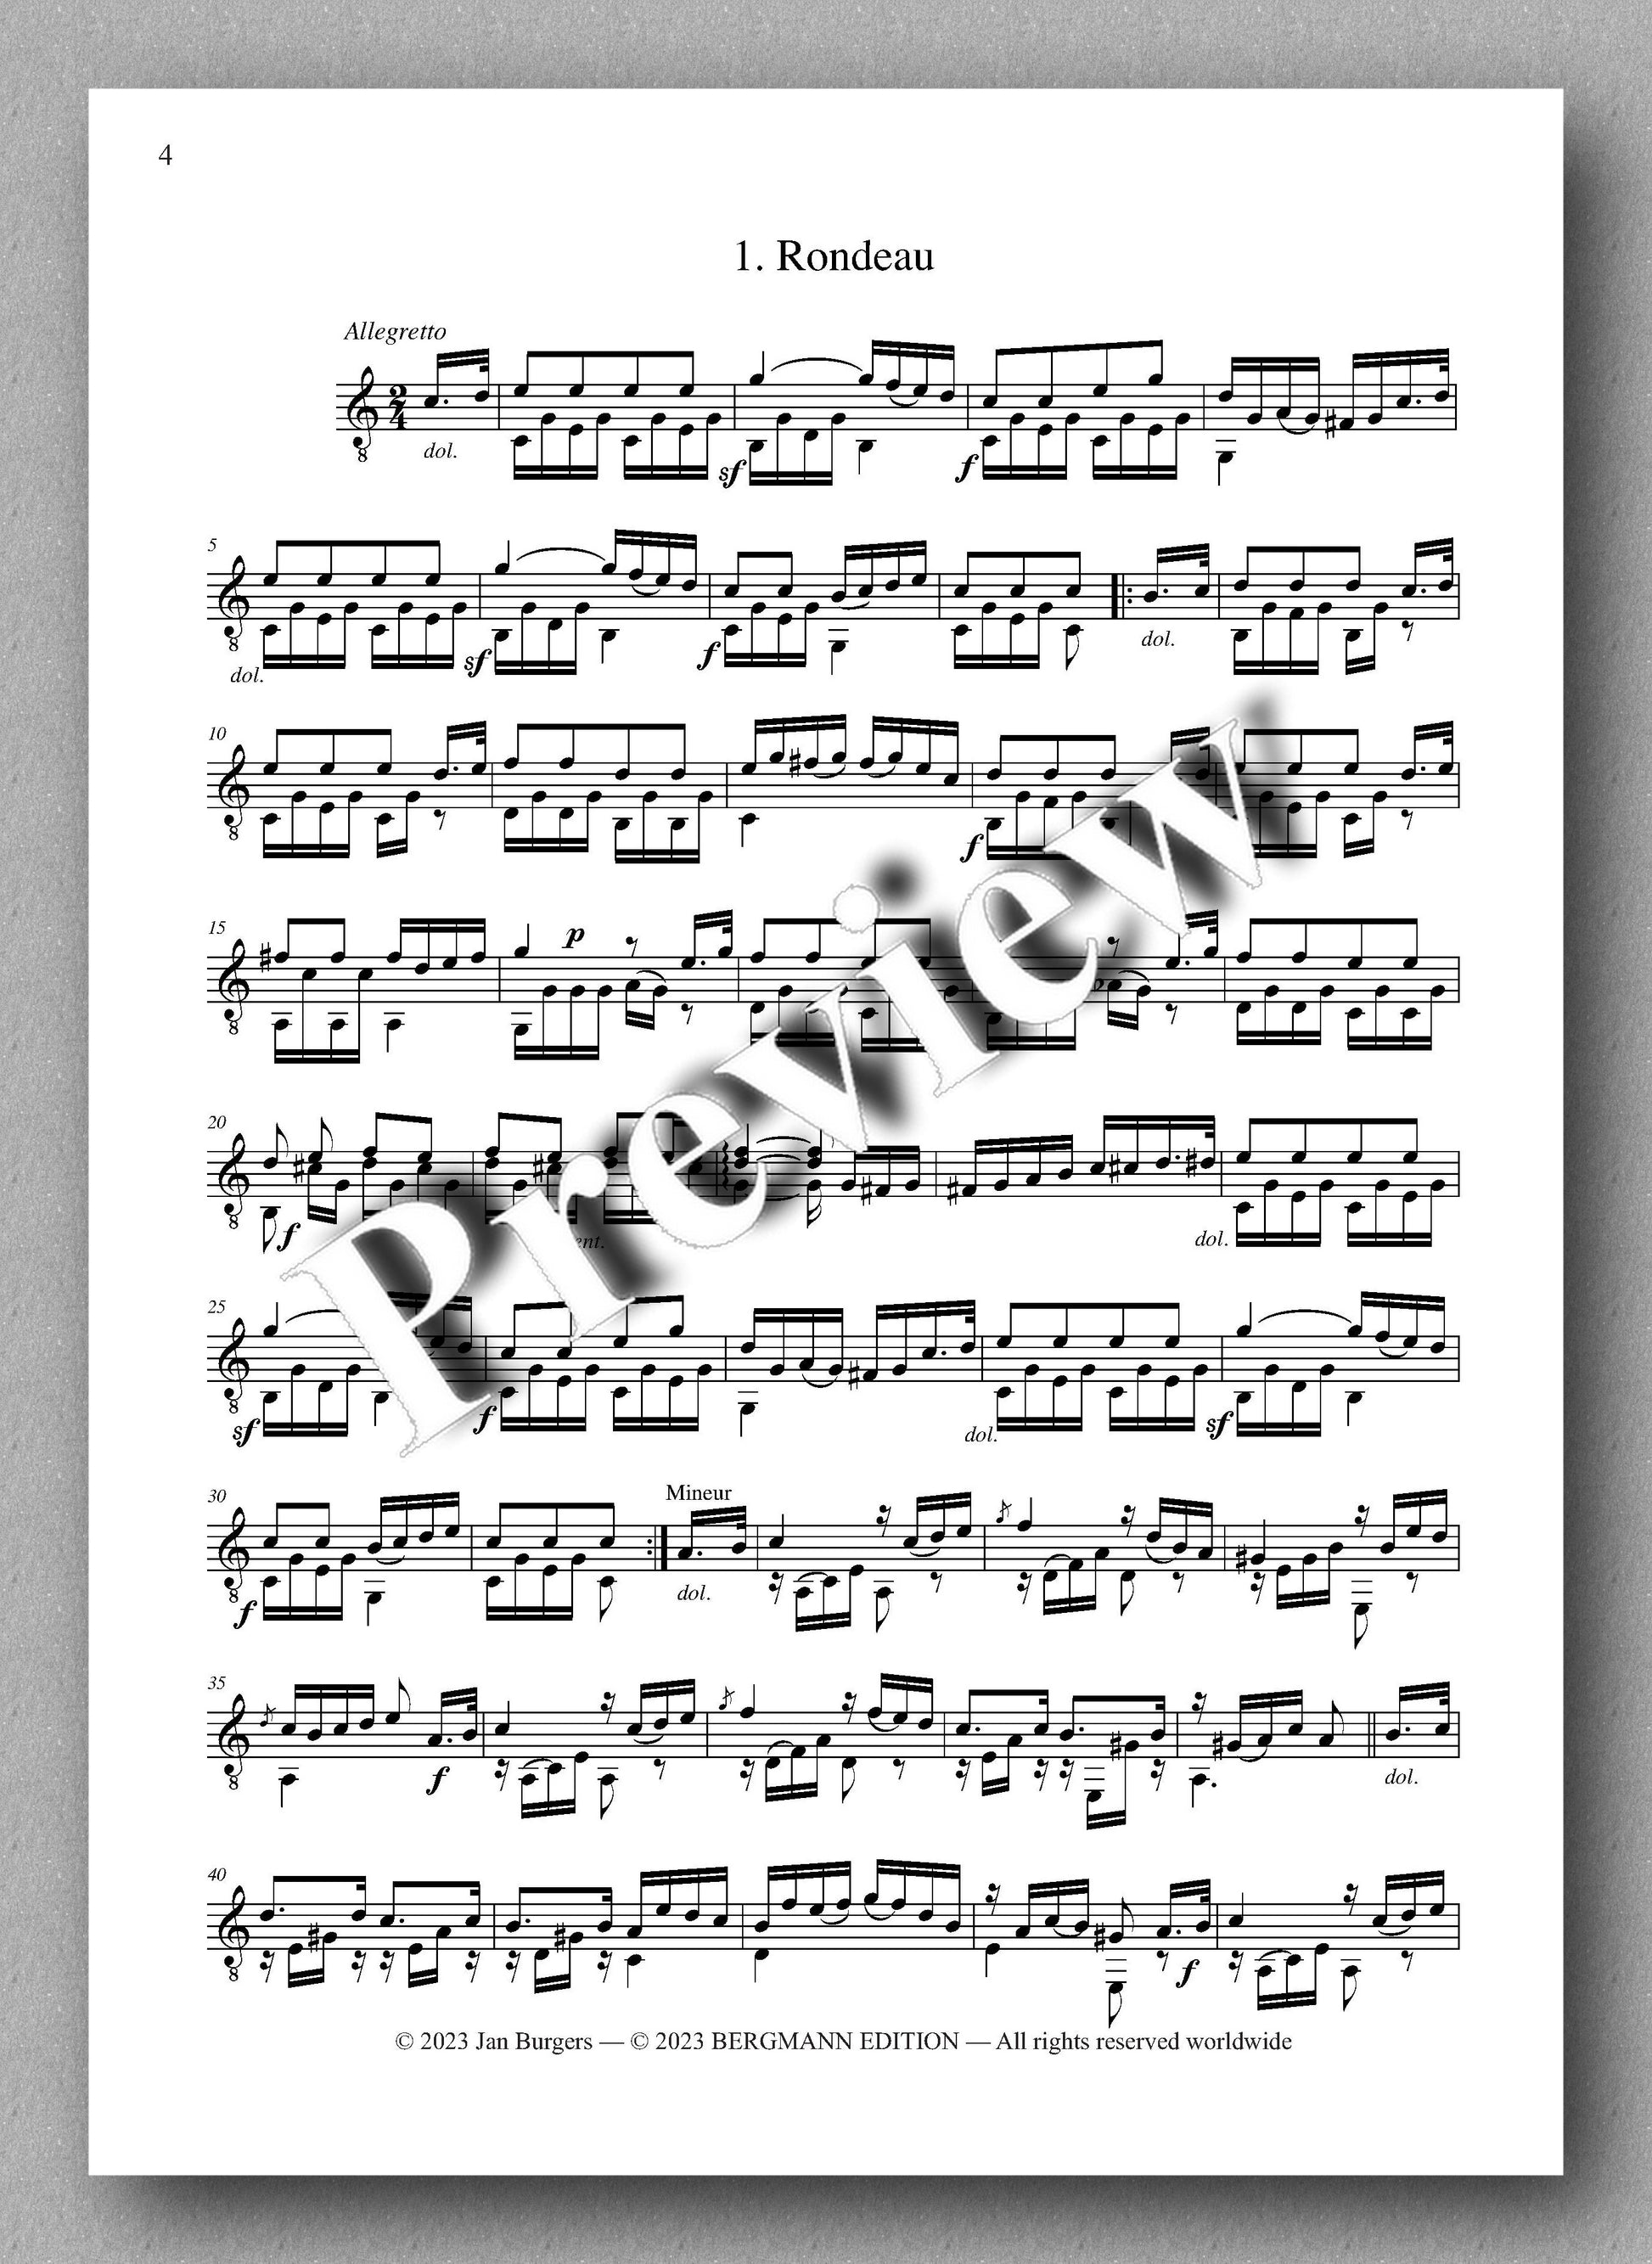 Copy of Molino, Collected Works for Guitar Solo, Vol. 26 - preview of the music score 1